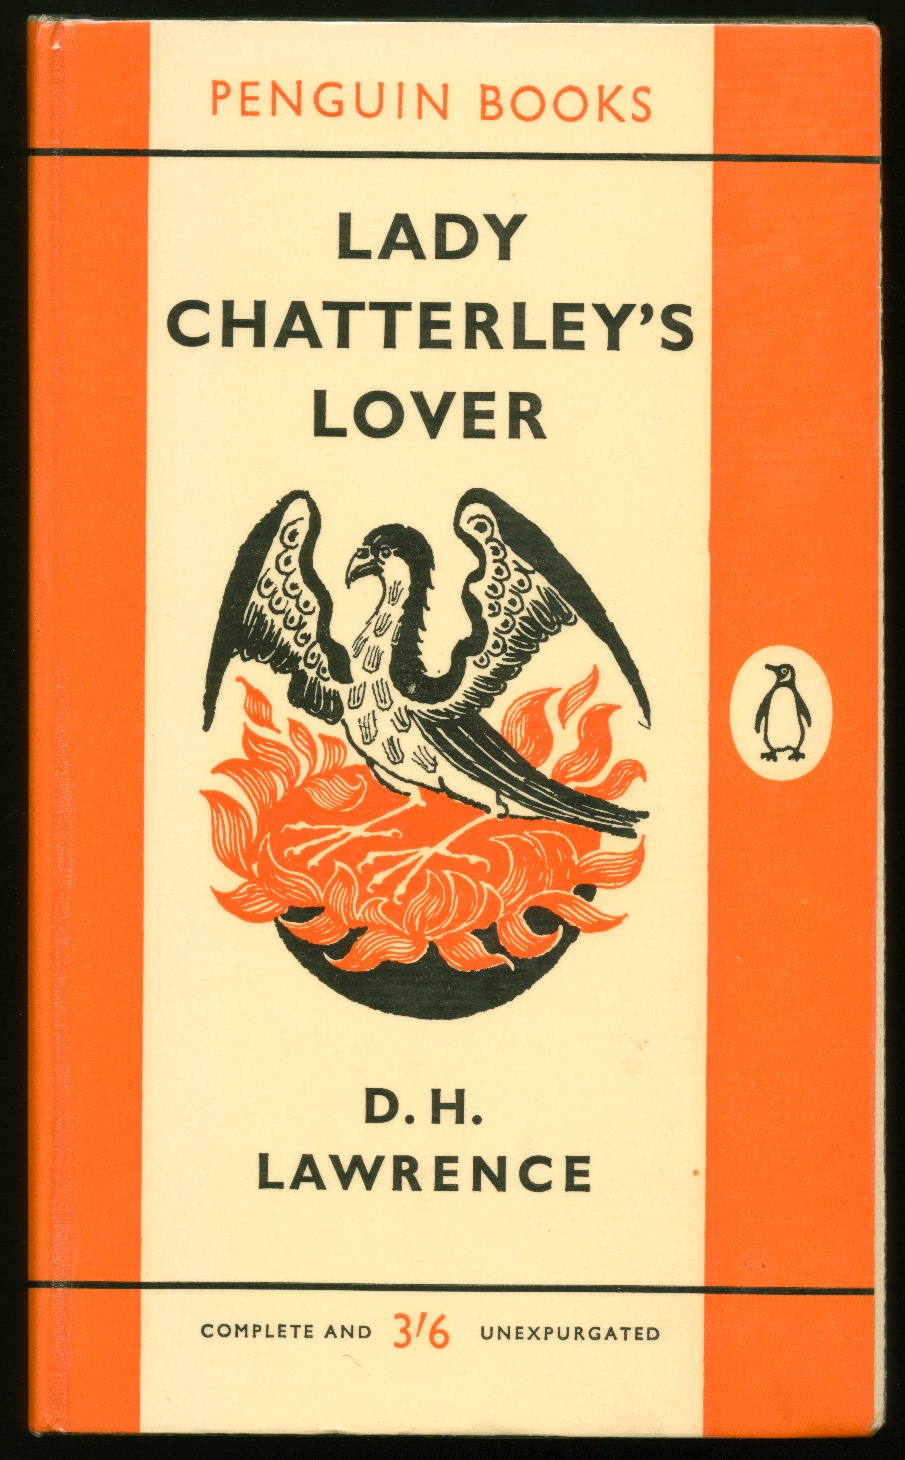 Lady Chatterley's Lover (D.H. Lawrence, 1928)